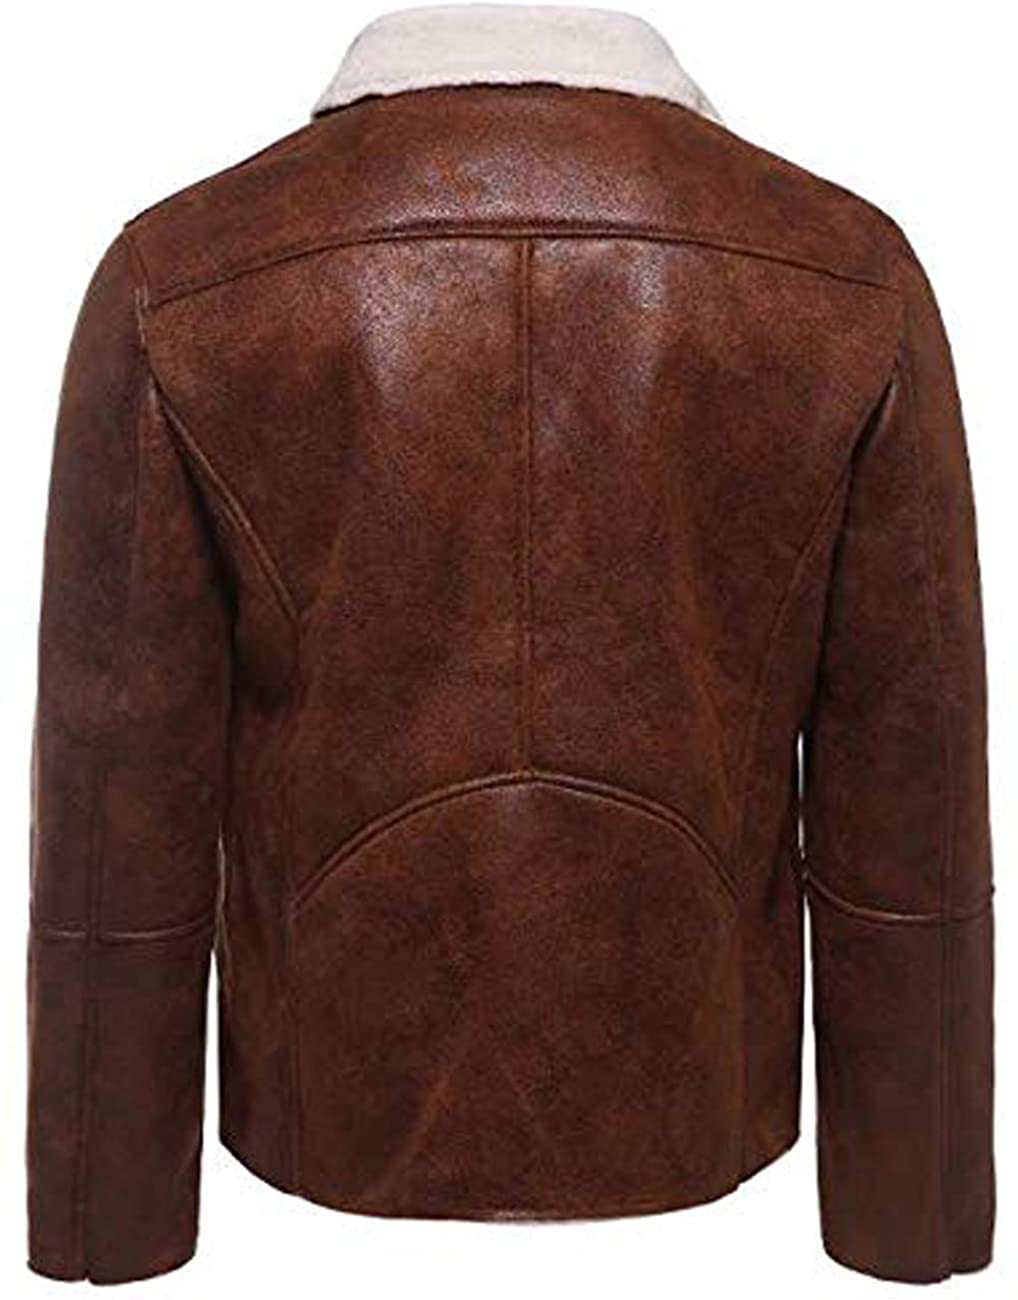 Men White Shearling FUR Genuine Sheepskin Leather Jacket With Stylish Zip In Brown